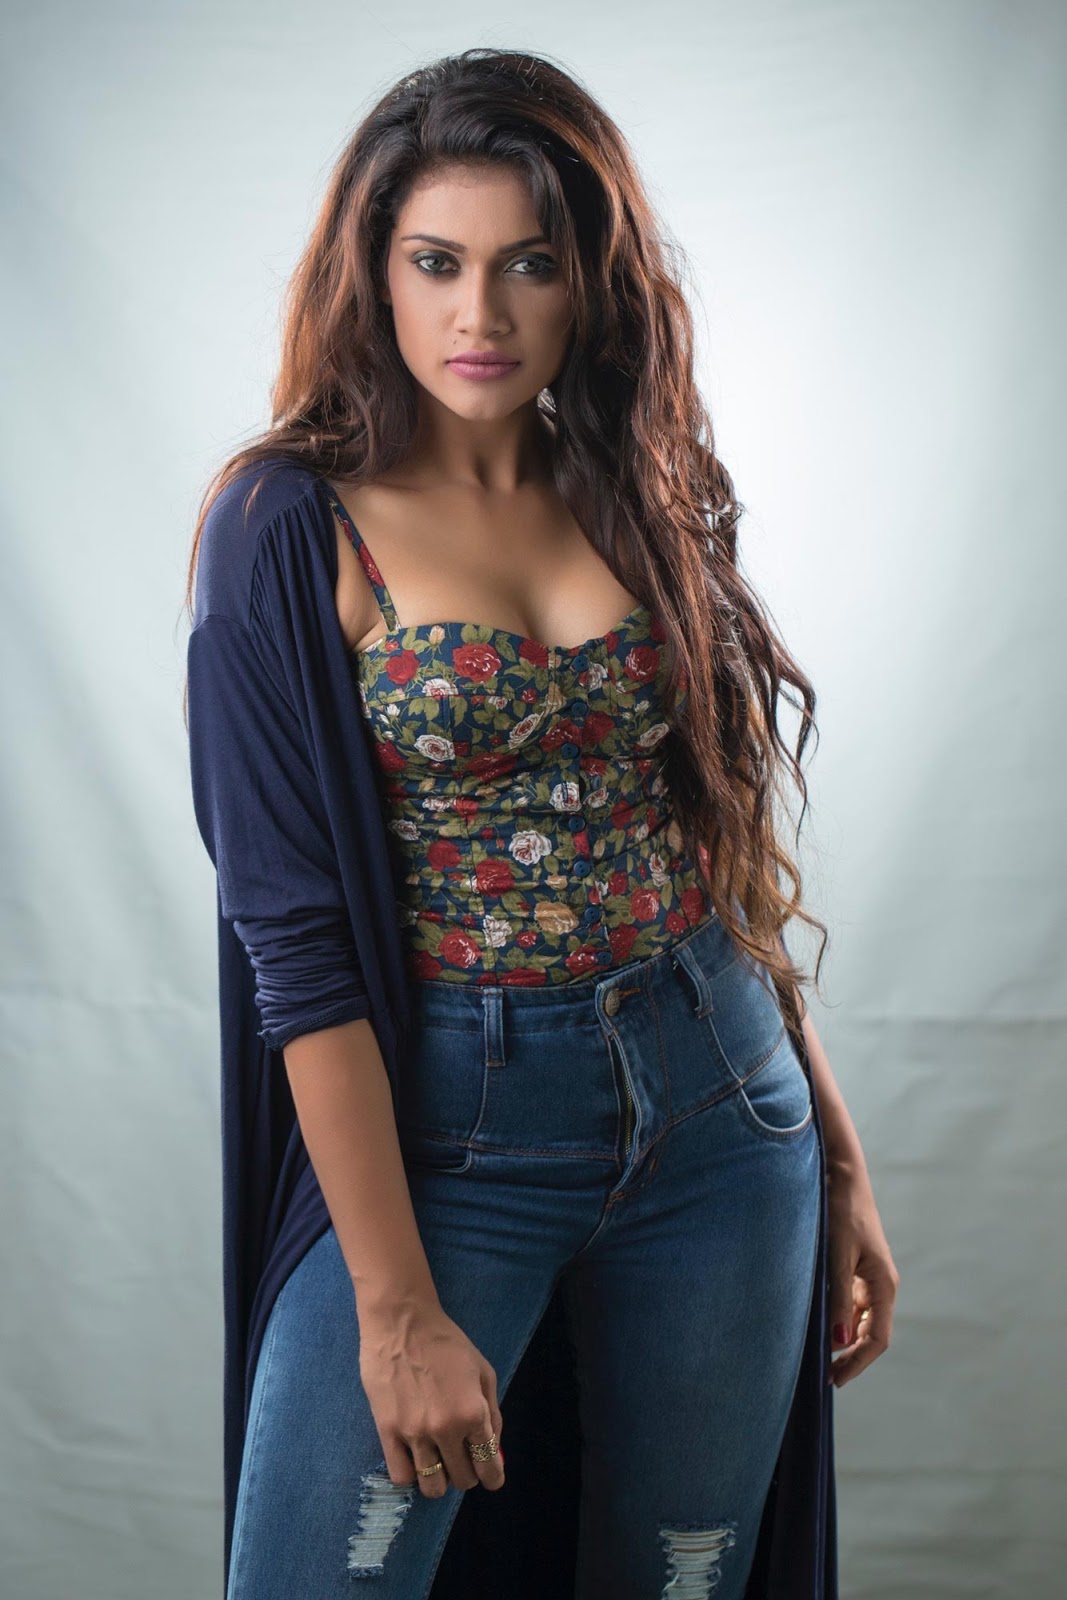 Latest images of Sri Lankan Actress and Model Images And Videos 16PLUSLK